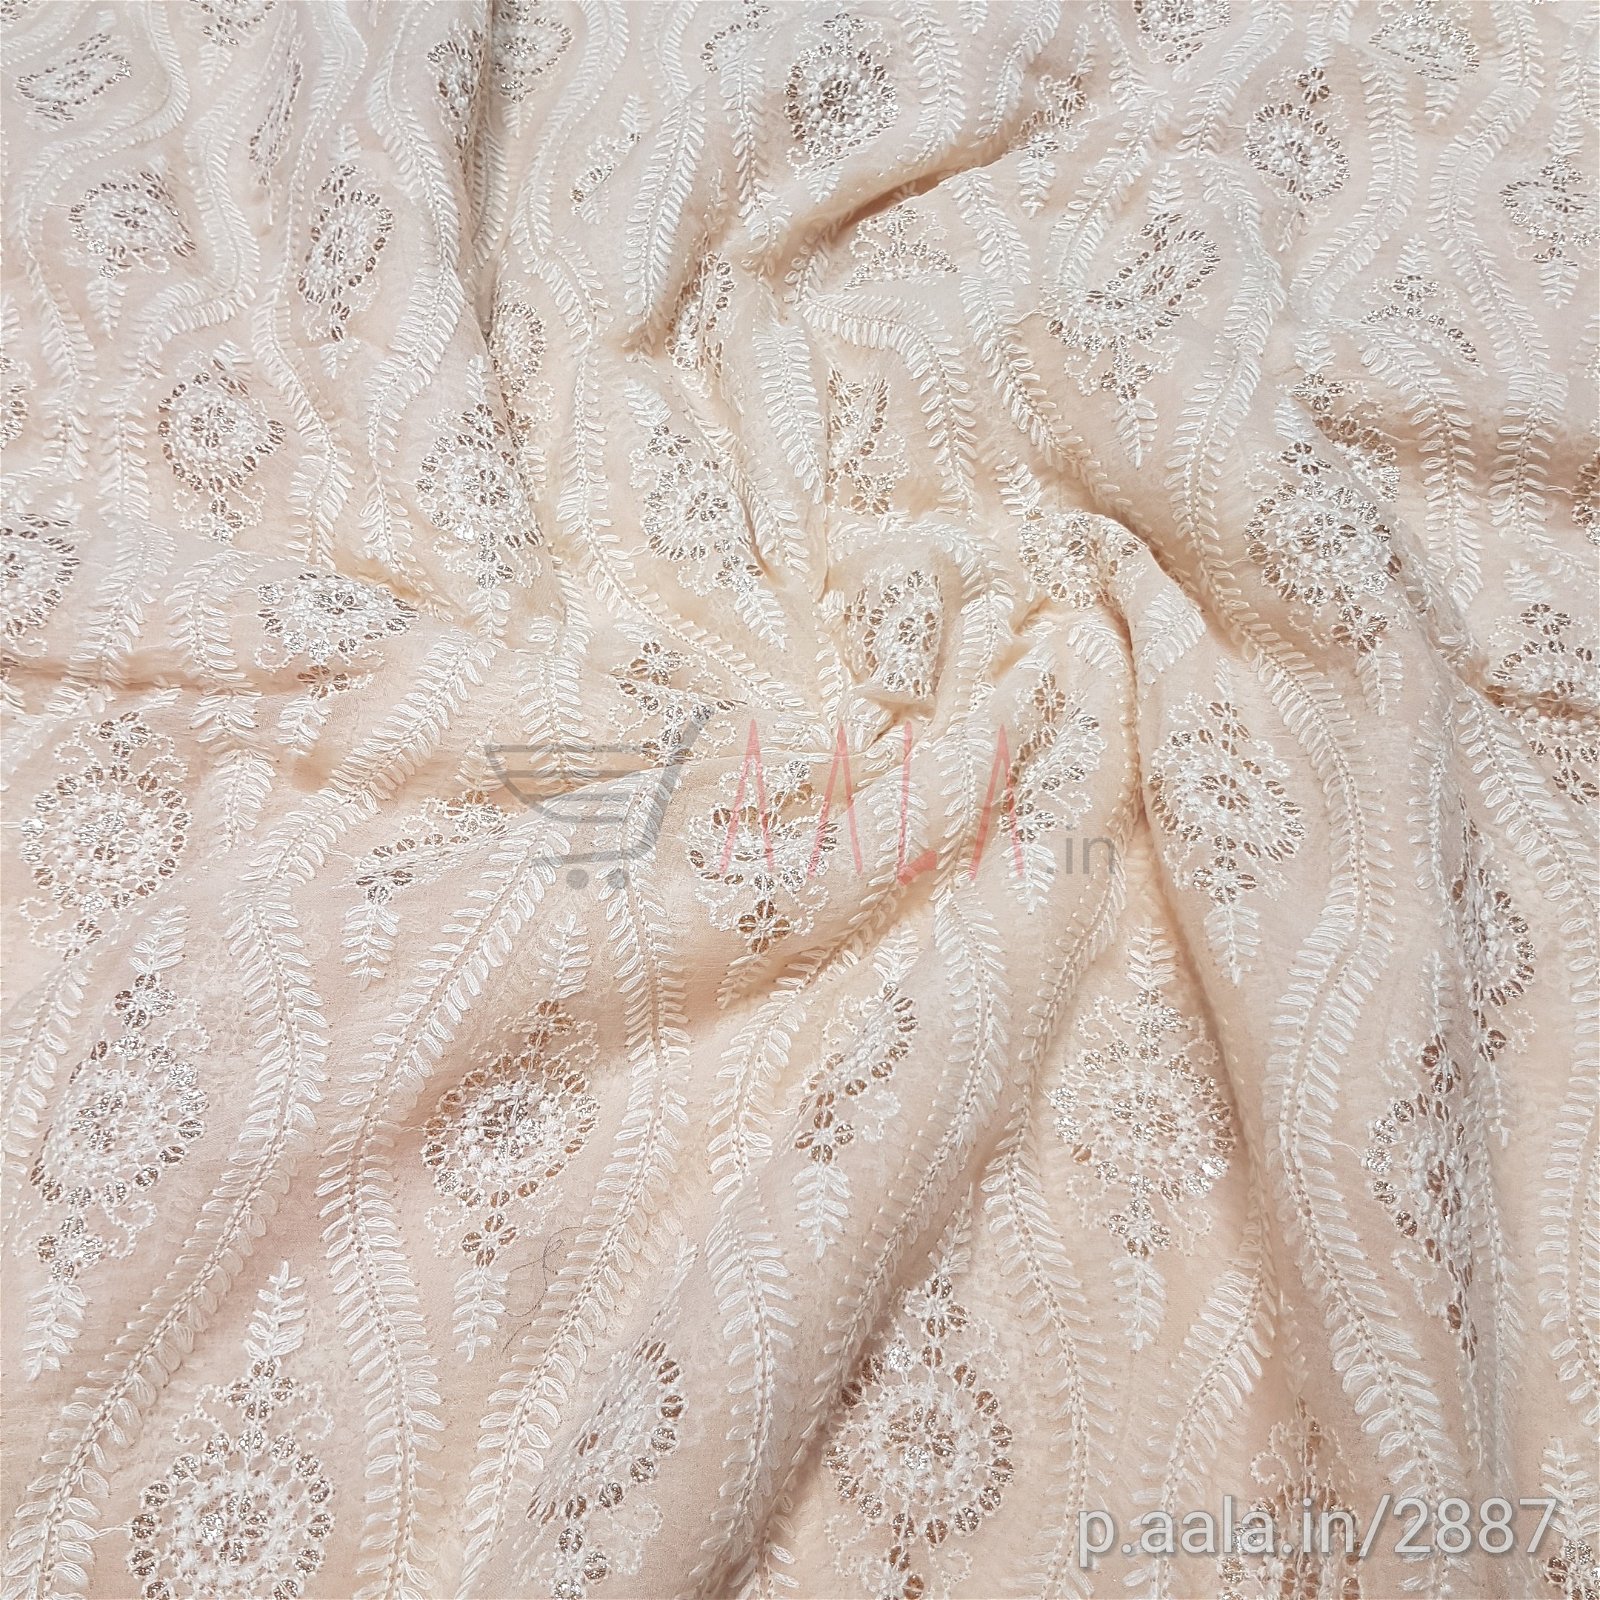 Embroidered Georgette Viscose 44 Inches Dyed Per Metre #2887